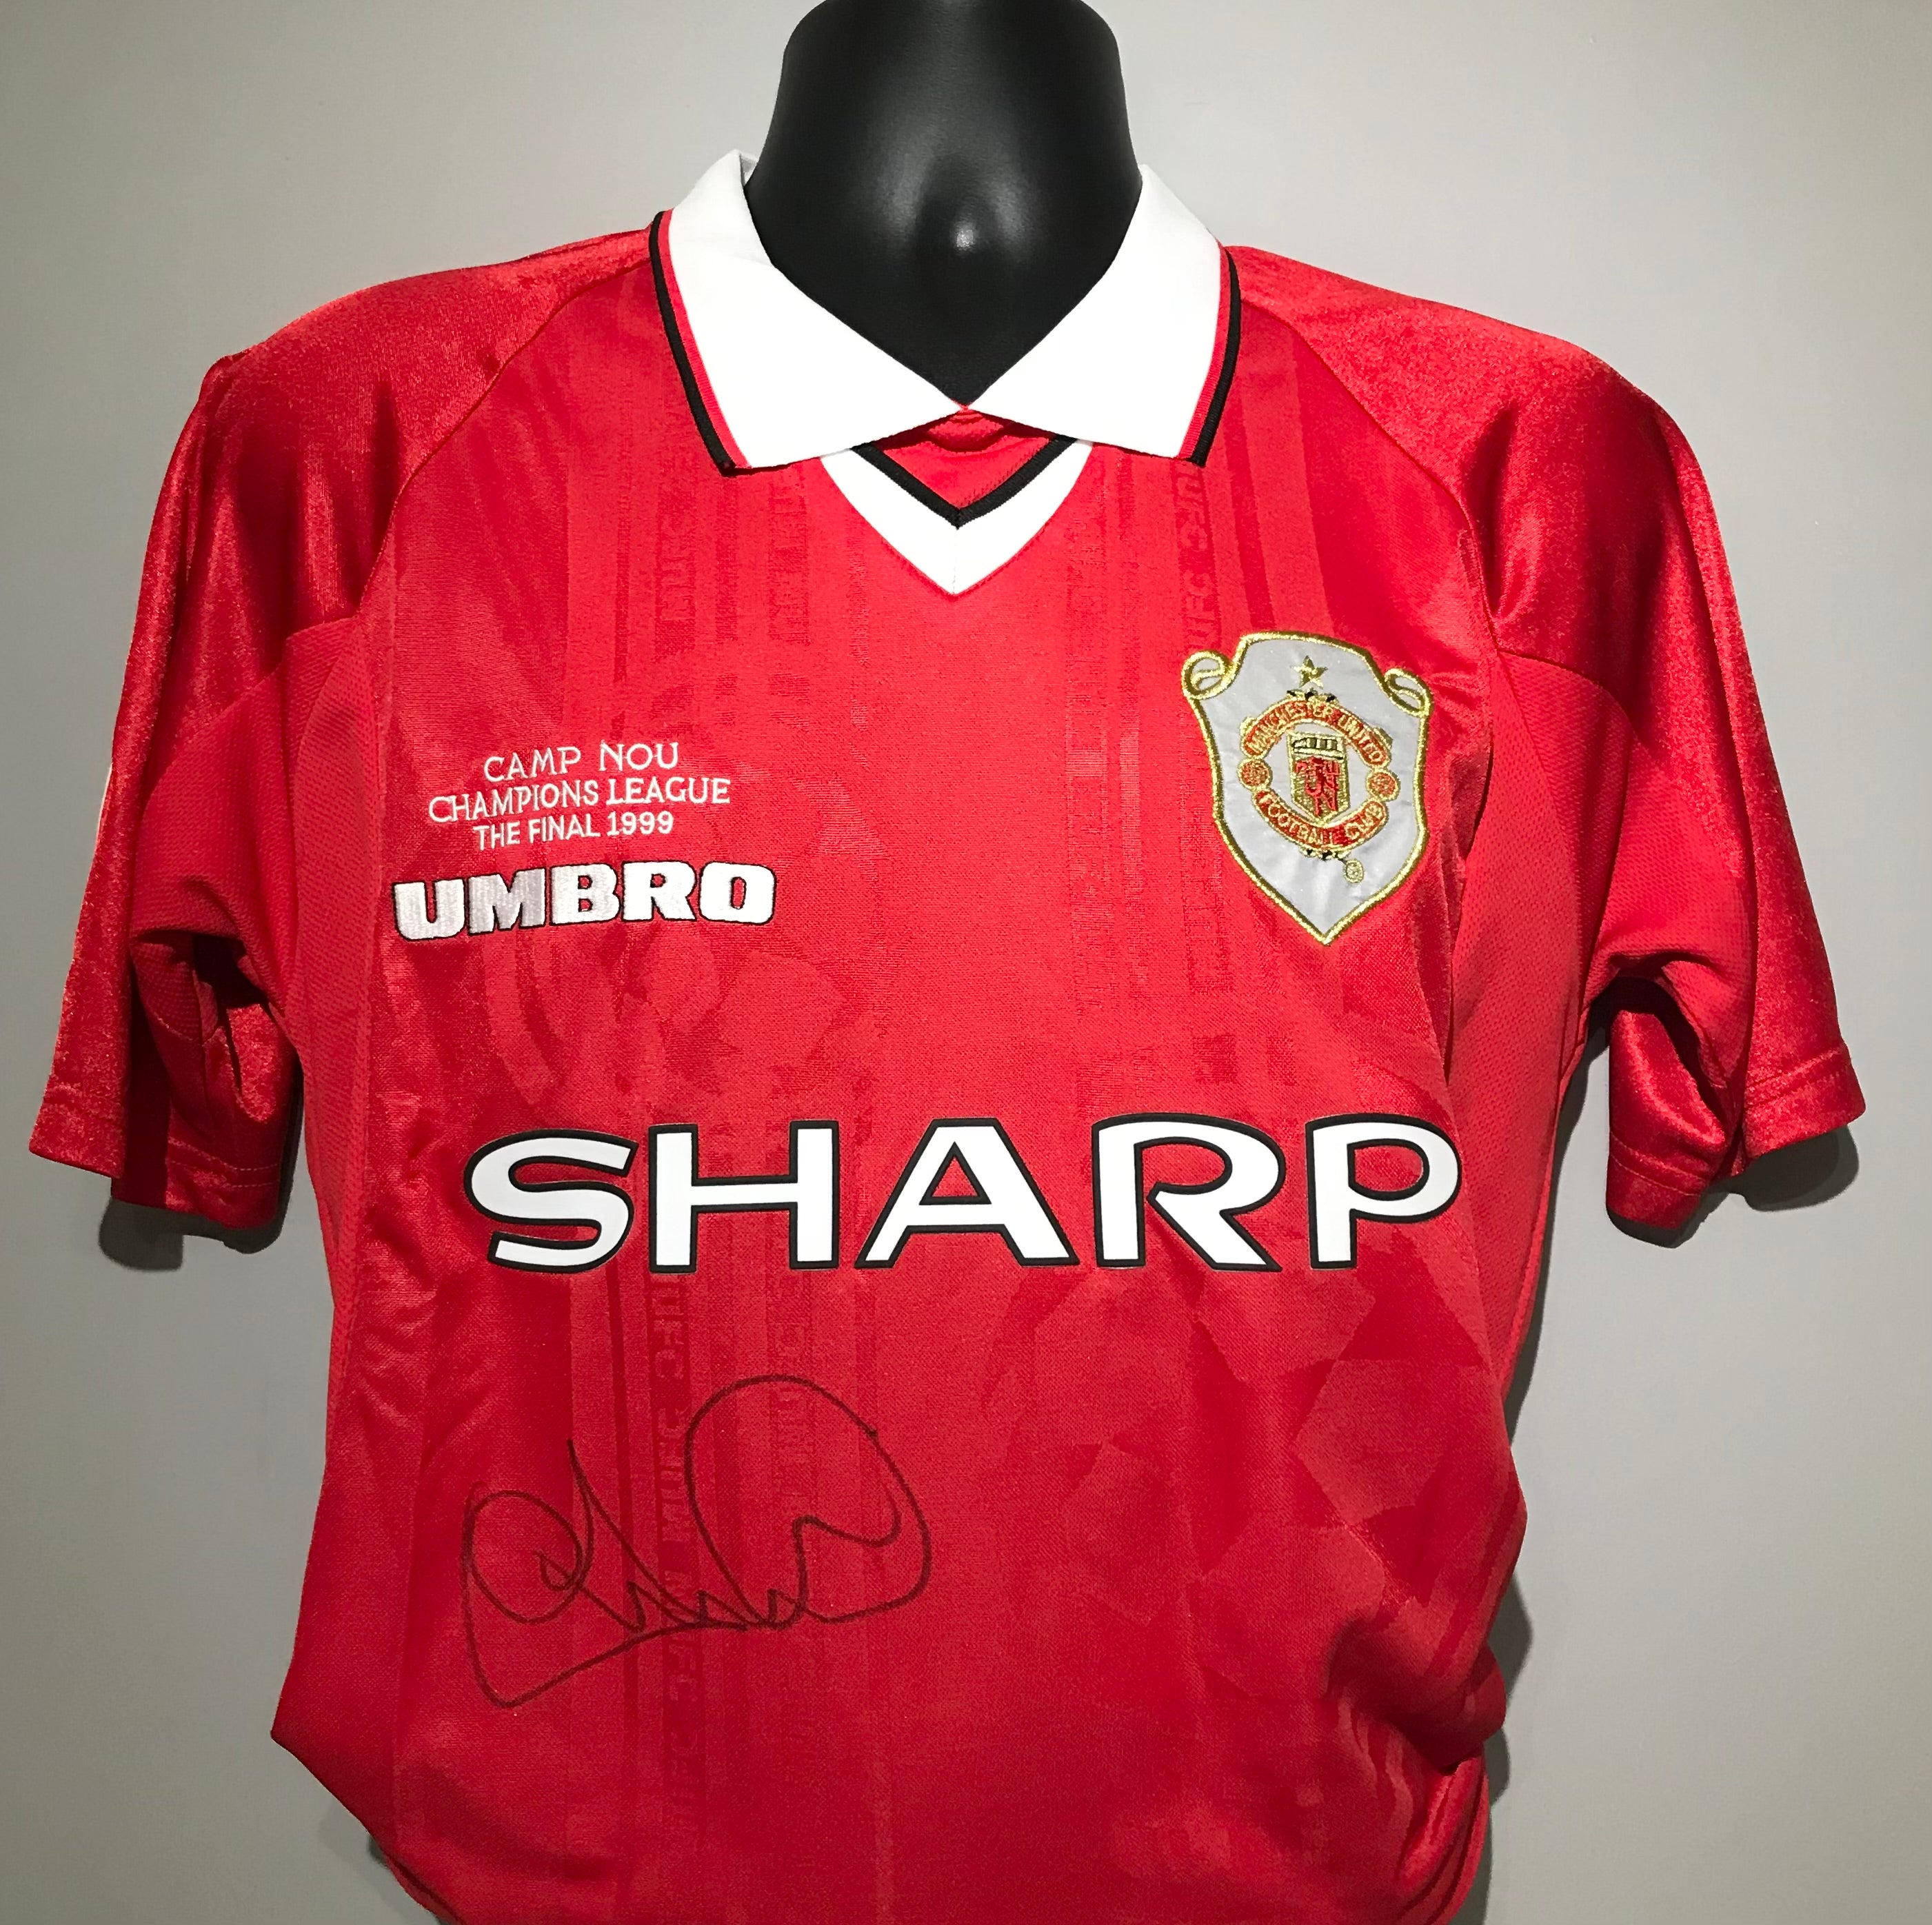 Andrew Cole signed 1999 Champions League Final shirt. - All Star Signings